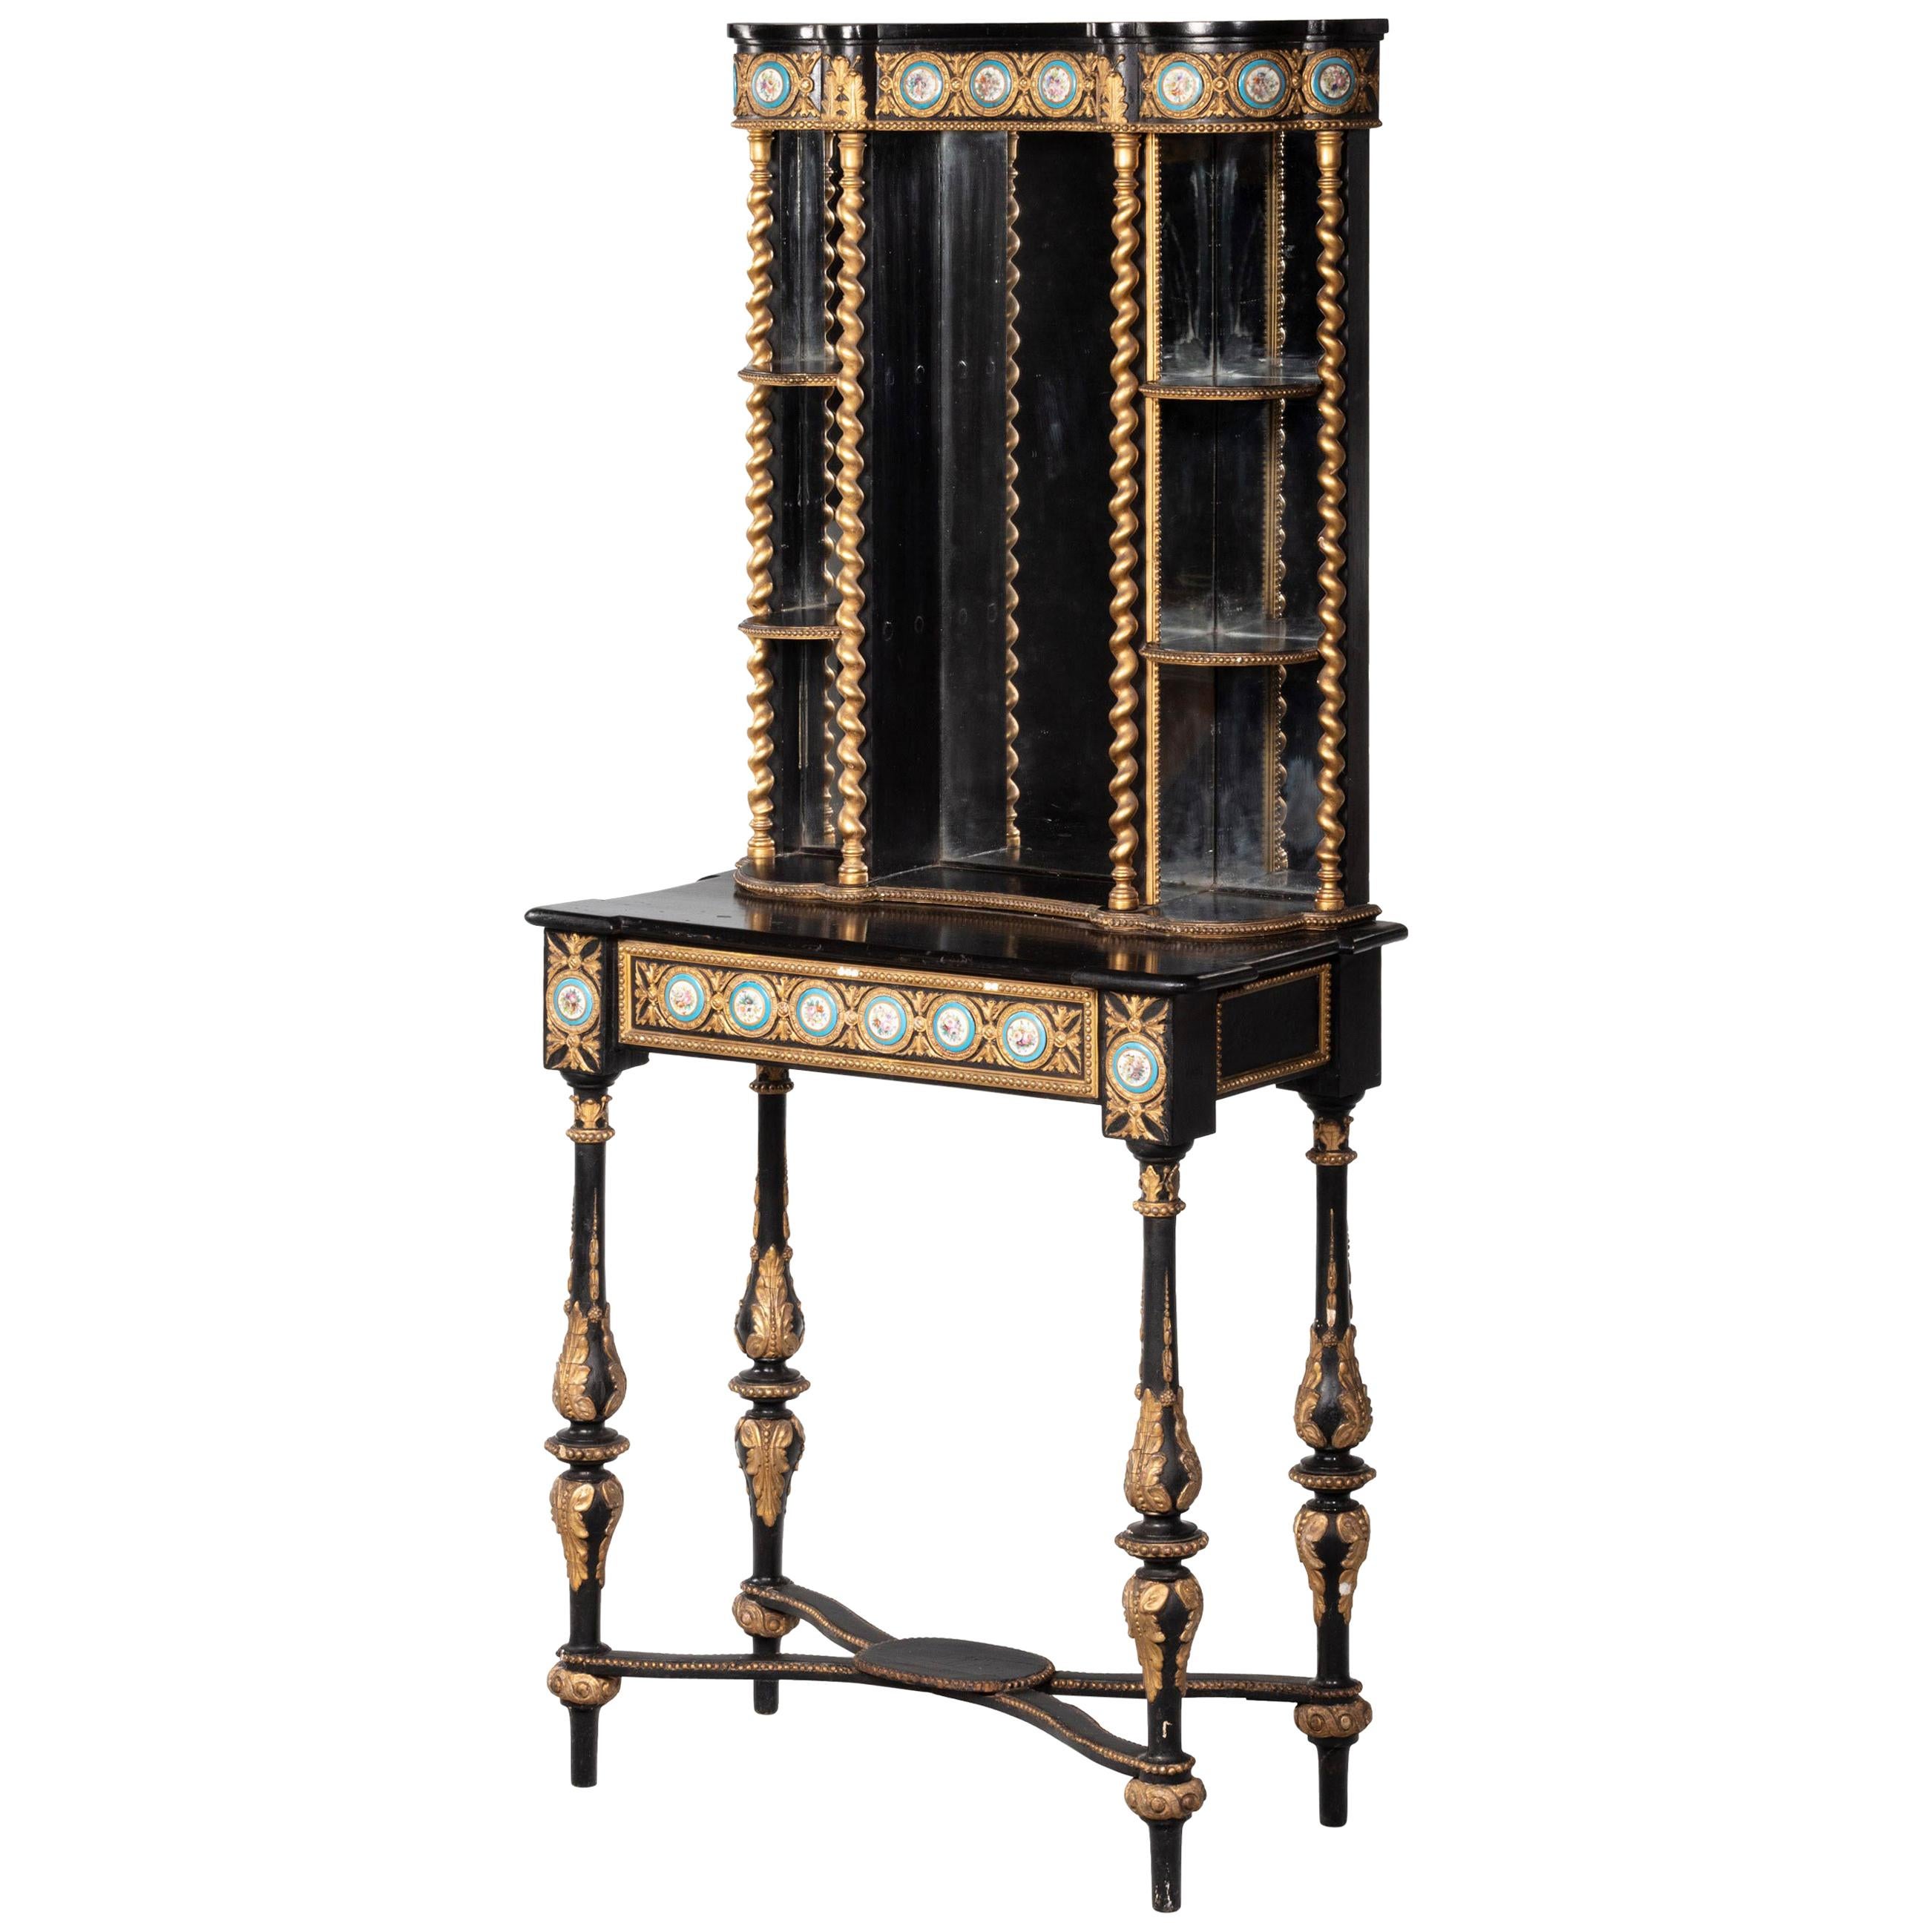 Small 19th Century French Cabinet with Elaborately Carved and Gilded Decoration